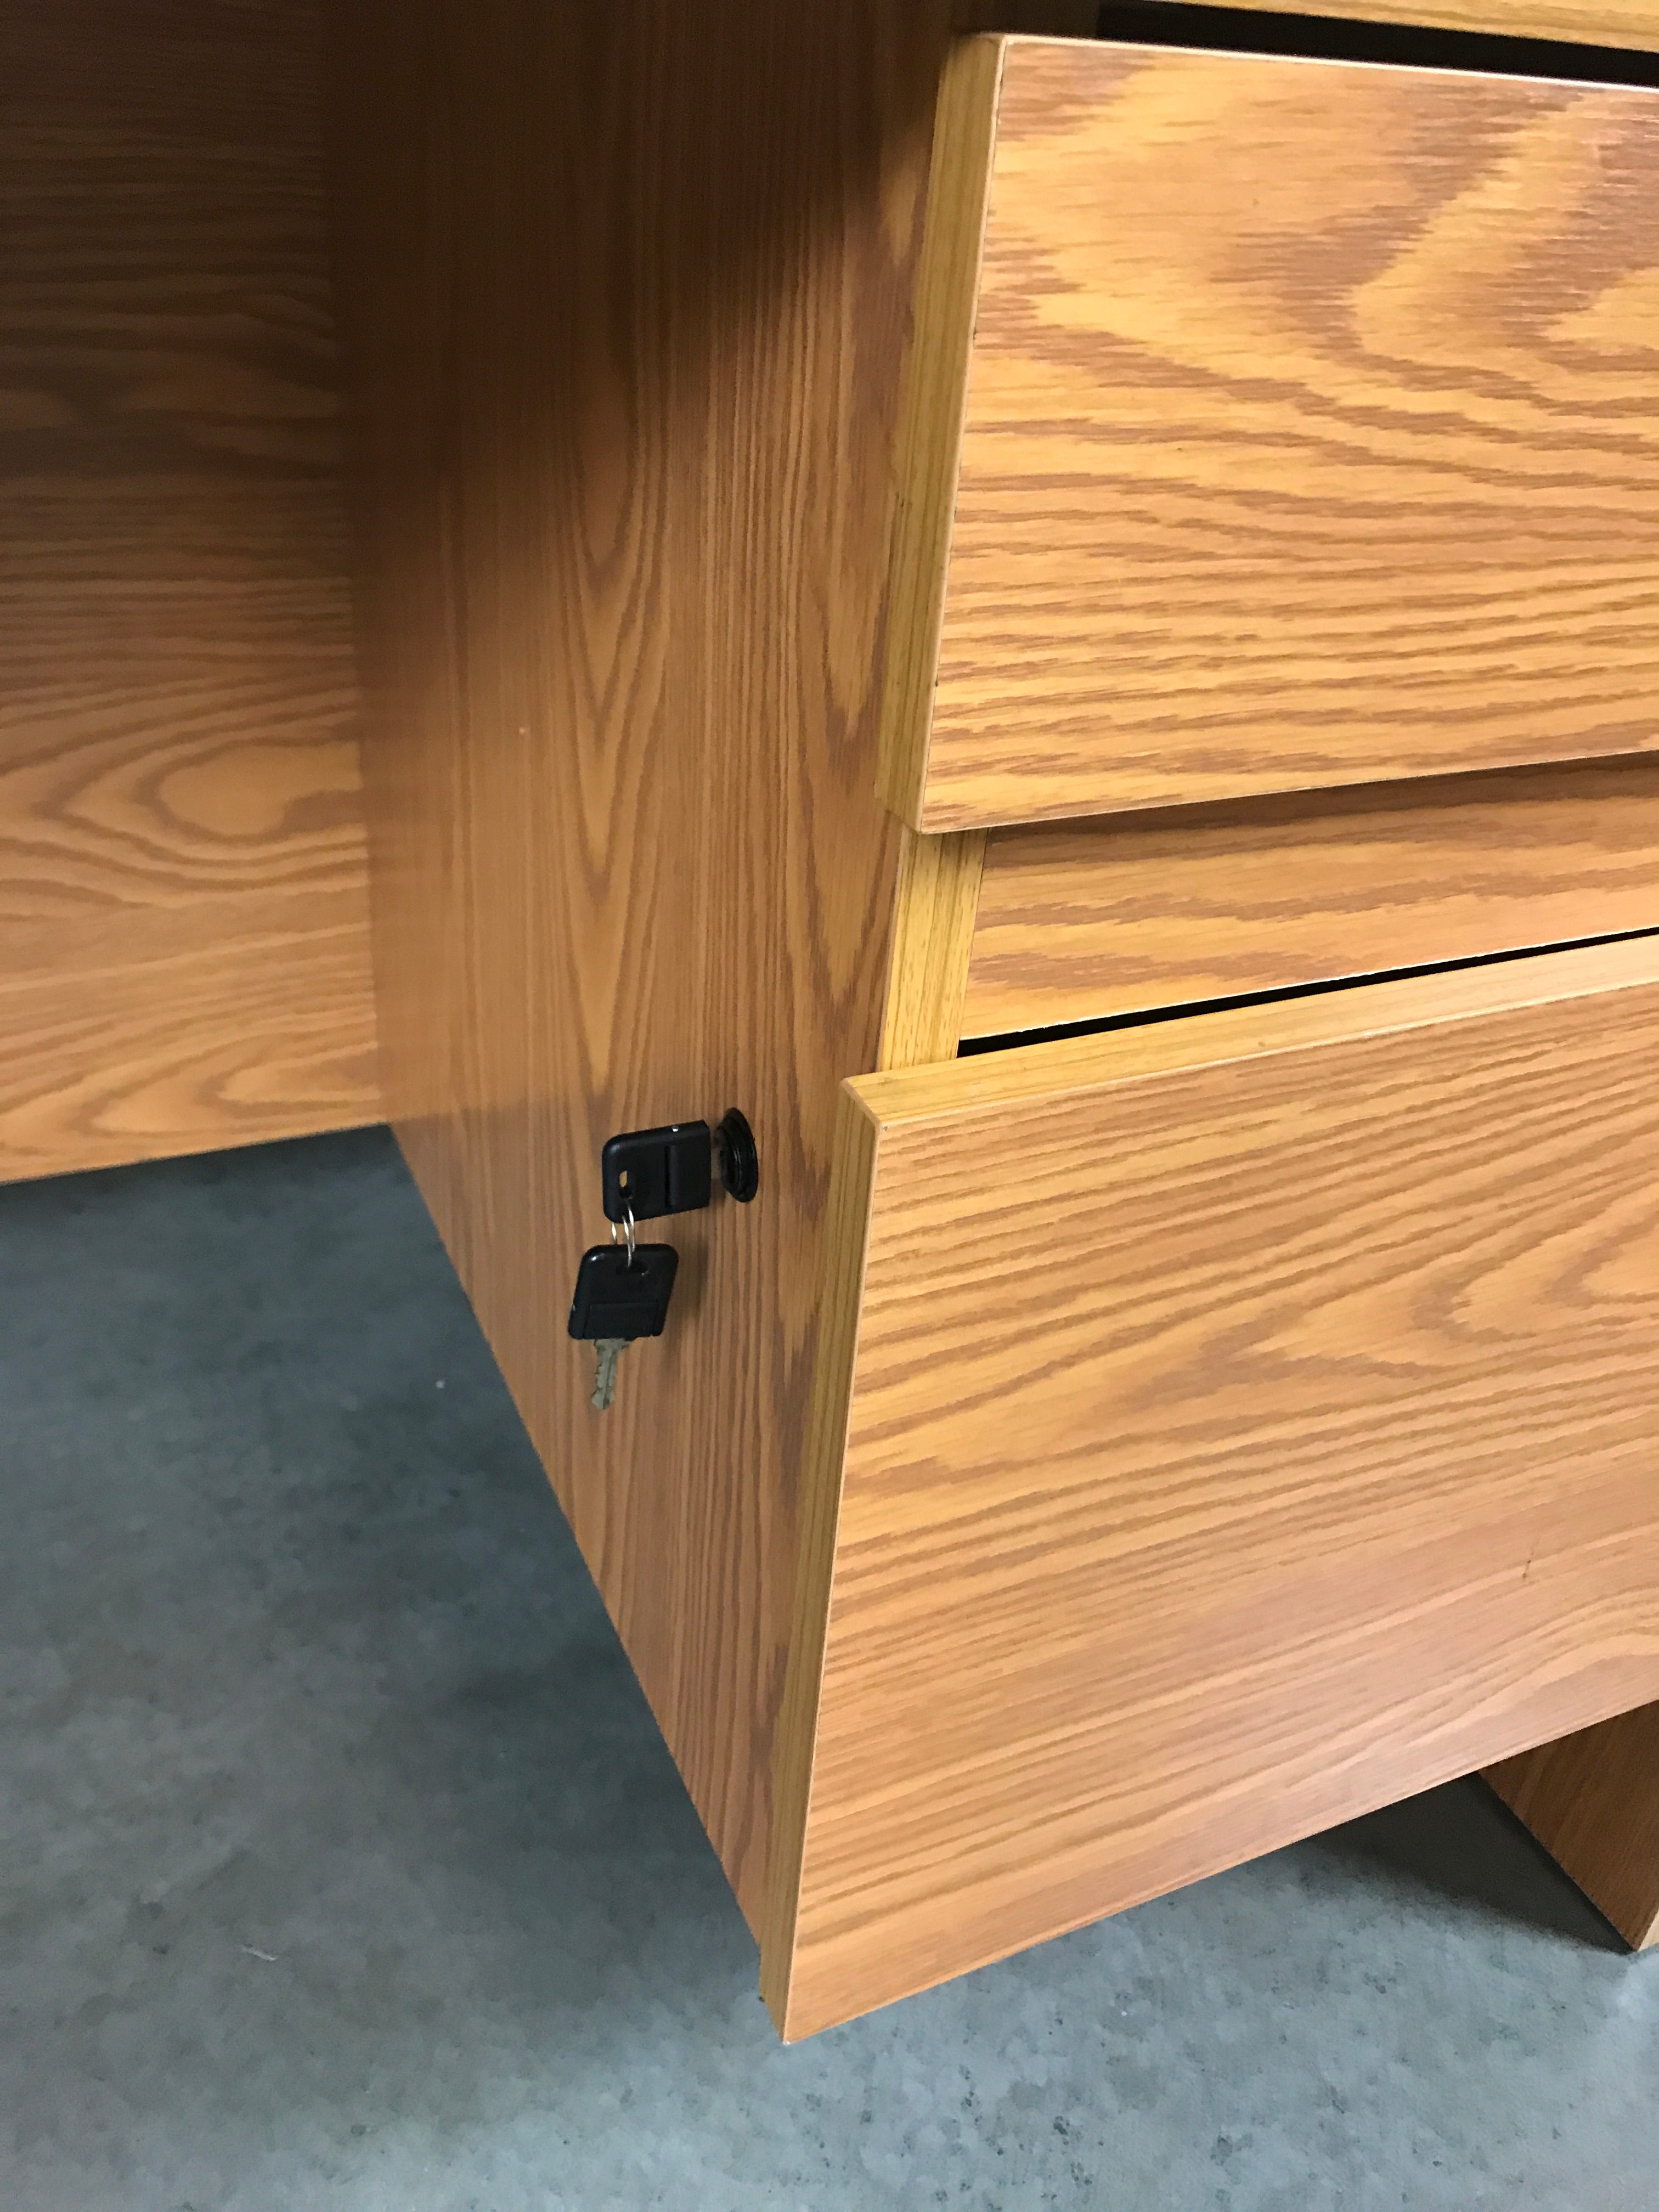 Lorell Wooden Computer Desk with Attached Hutch